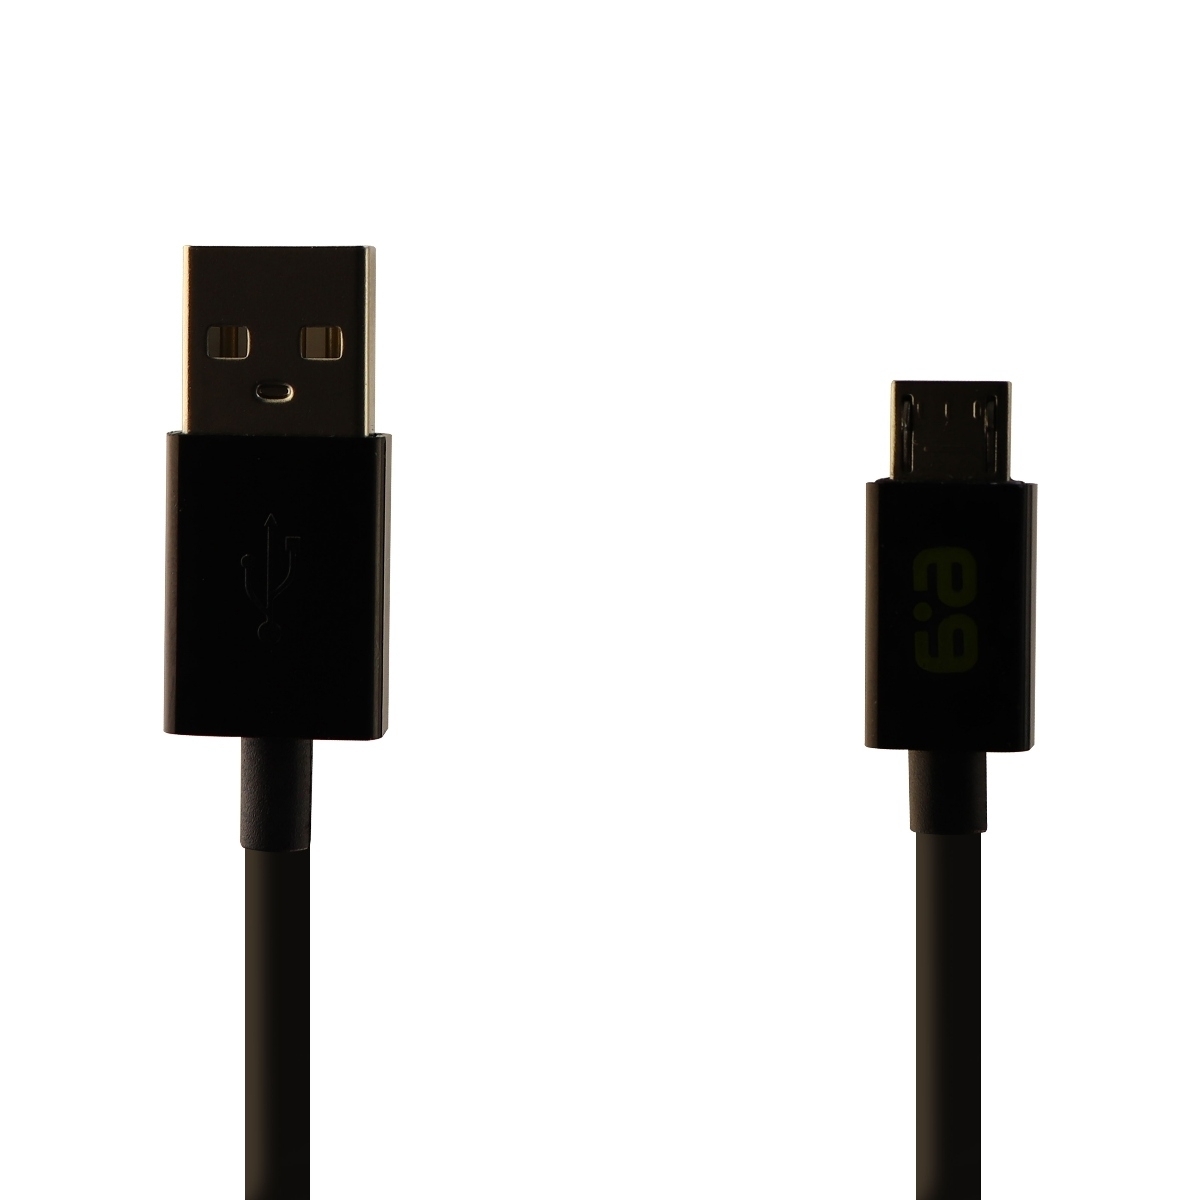 PureGear 6-Foot Universal Micro-USB To USB Charge And Sync Cable - Black (Refurbished)